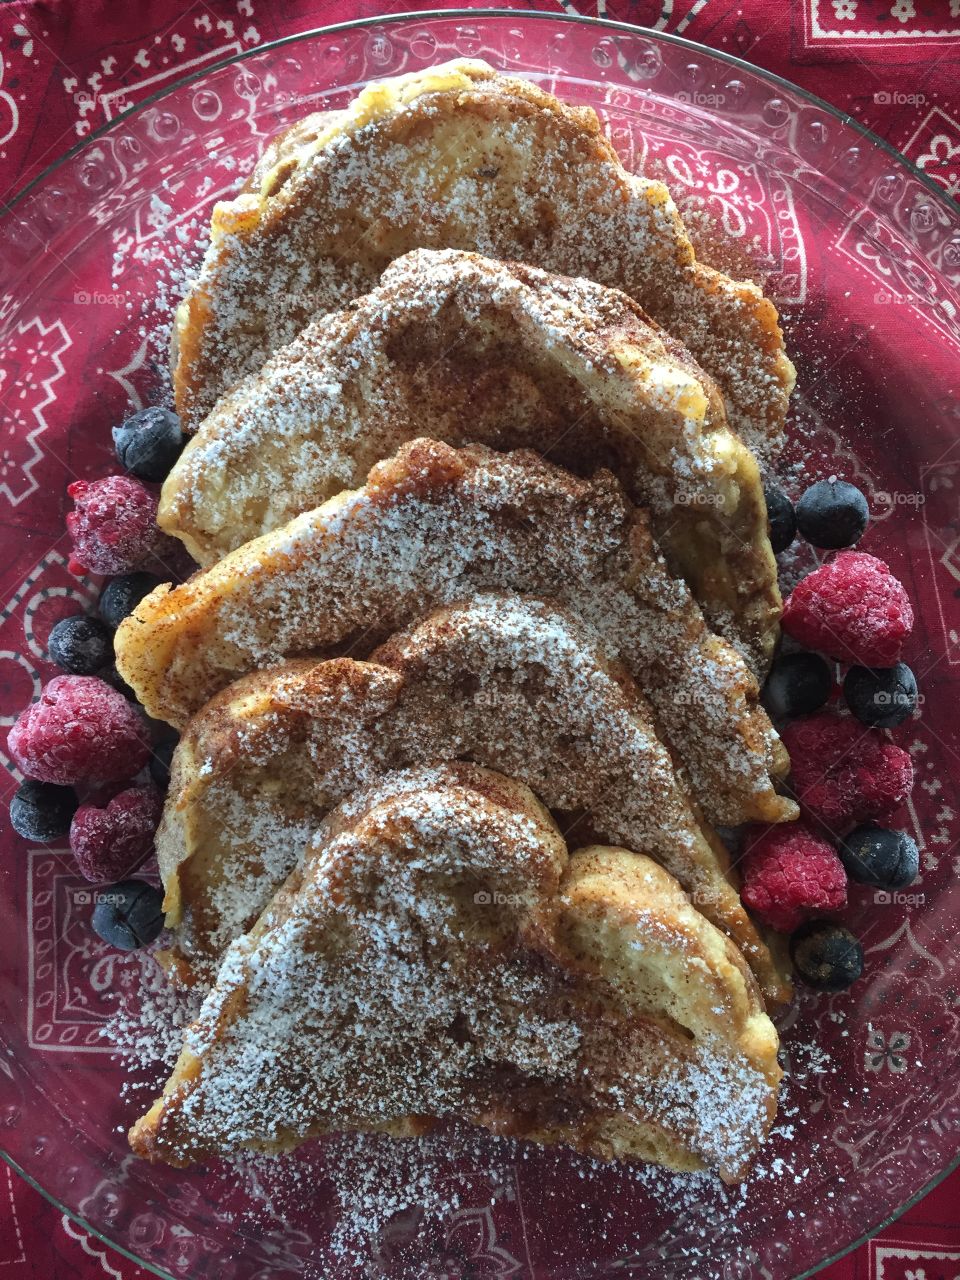 French toast on a clear glass plate, sprinkled with cinnamon and sugar, served with blueberries raspberries on a red handkerchief-patterned placemat